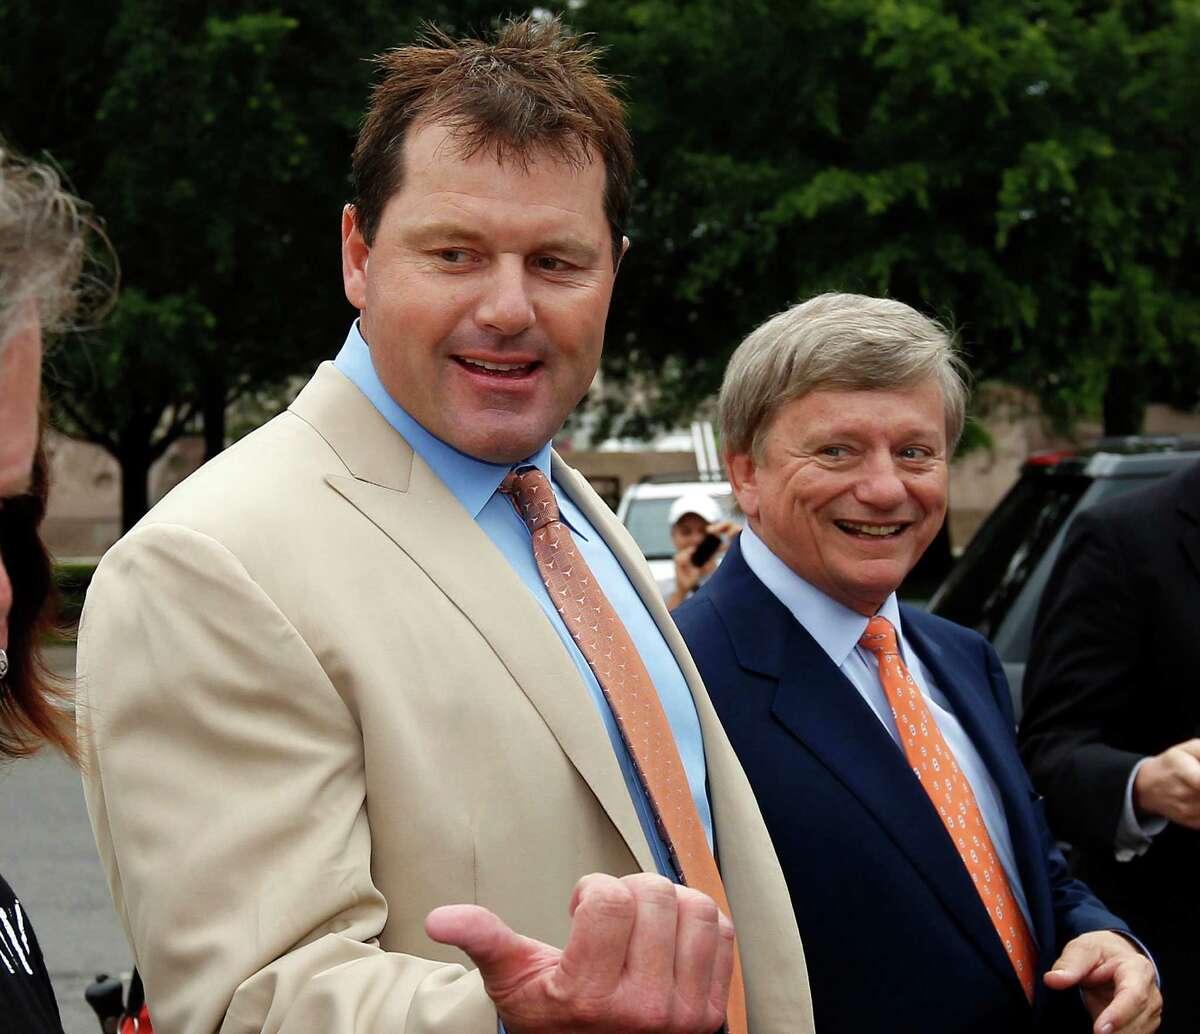 Former Major League Baseball pitcher Roger Clemens, left, with his attorney Rusty Hardin. Clemens has been acquitted on all charges by a jury that decided he didn't lie to Congress when he denied using performance-enhancing drugs..